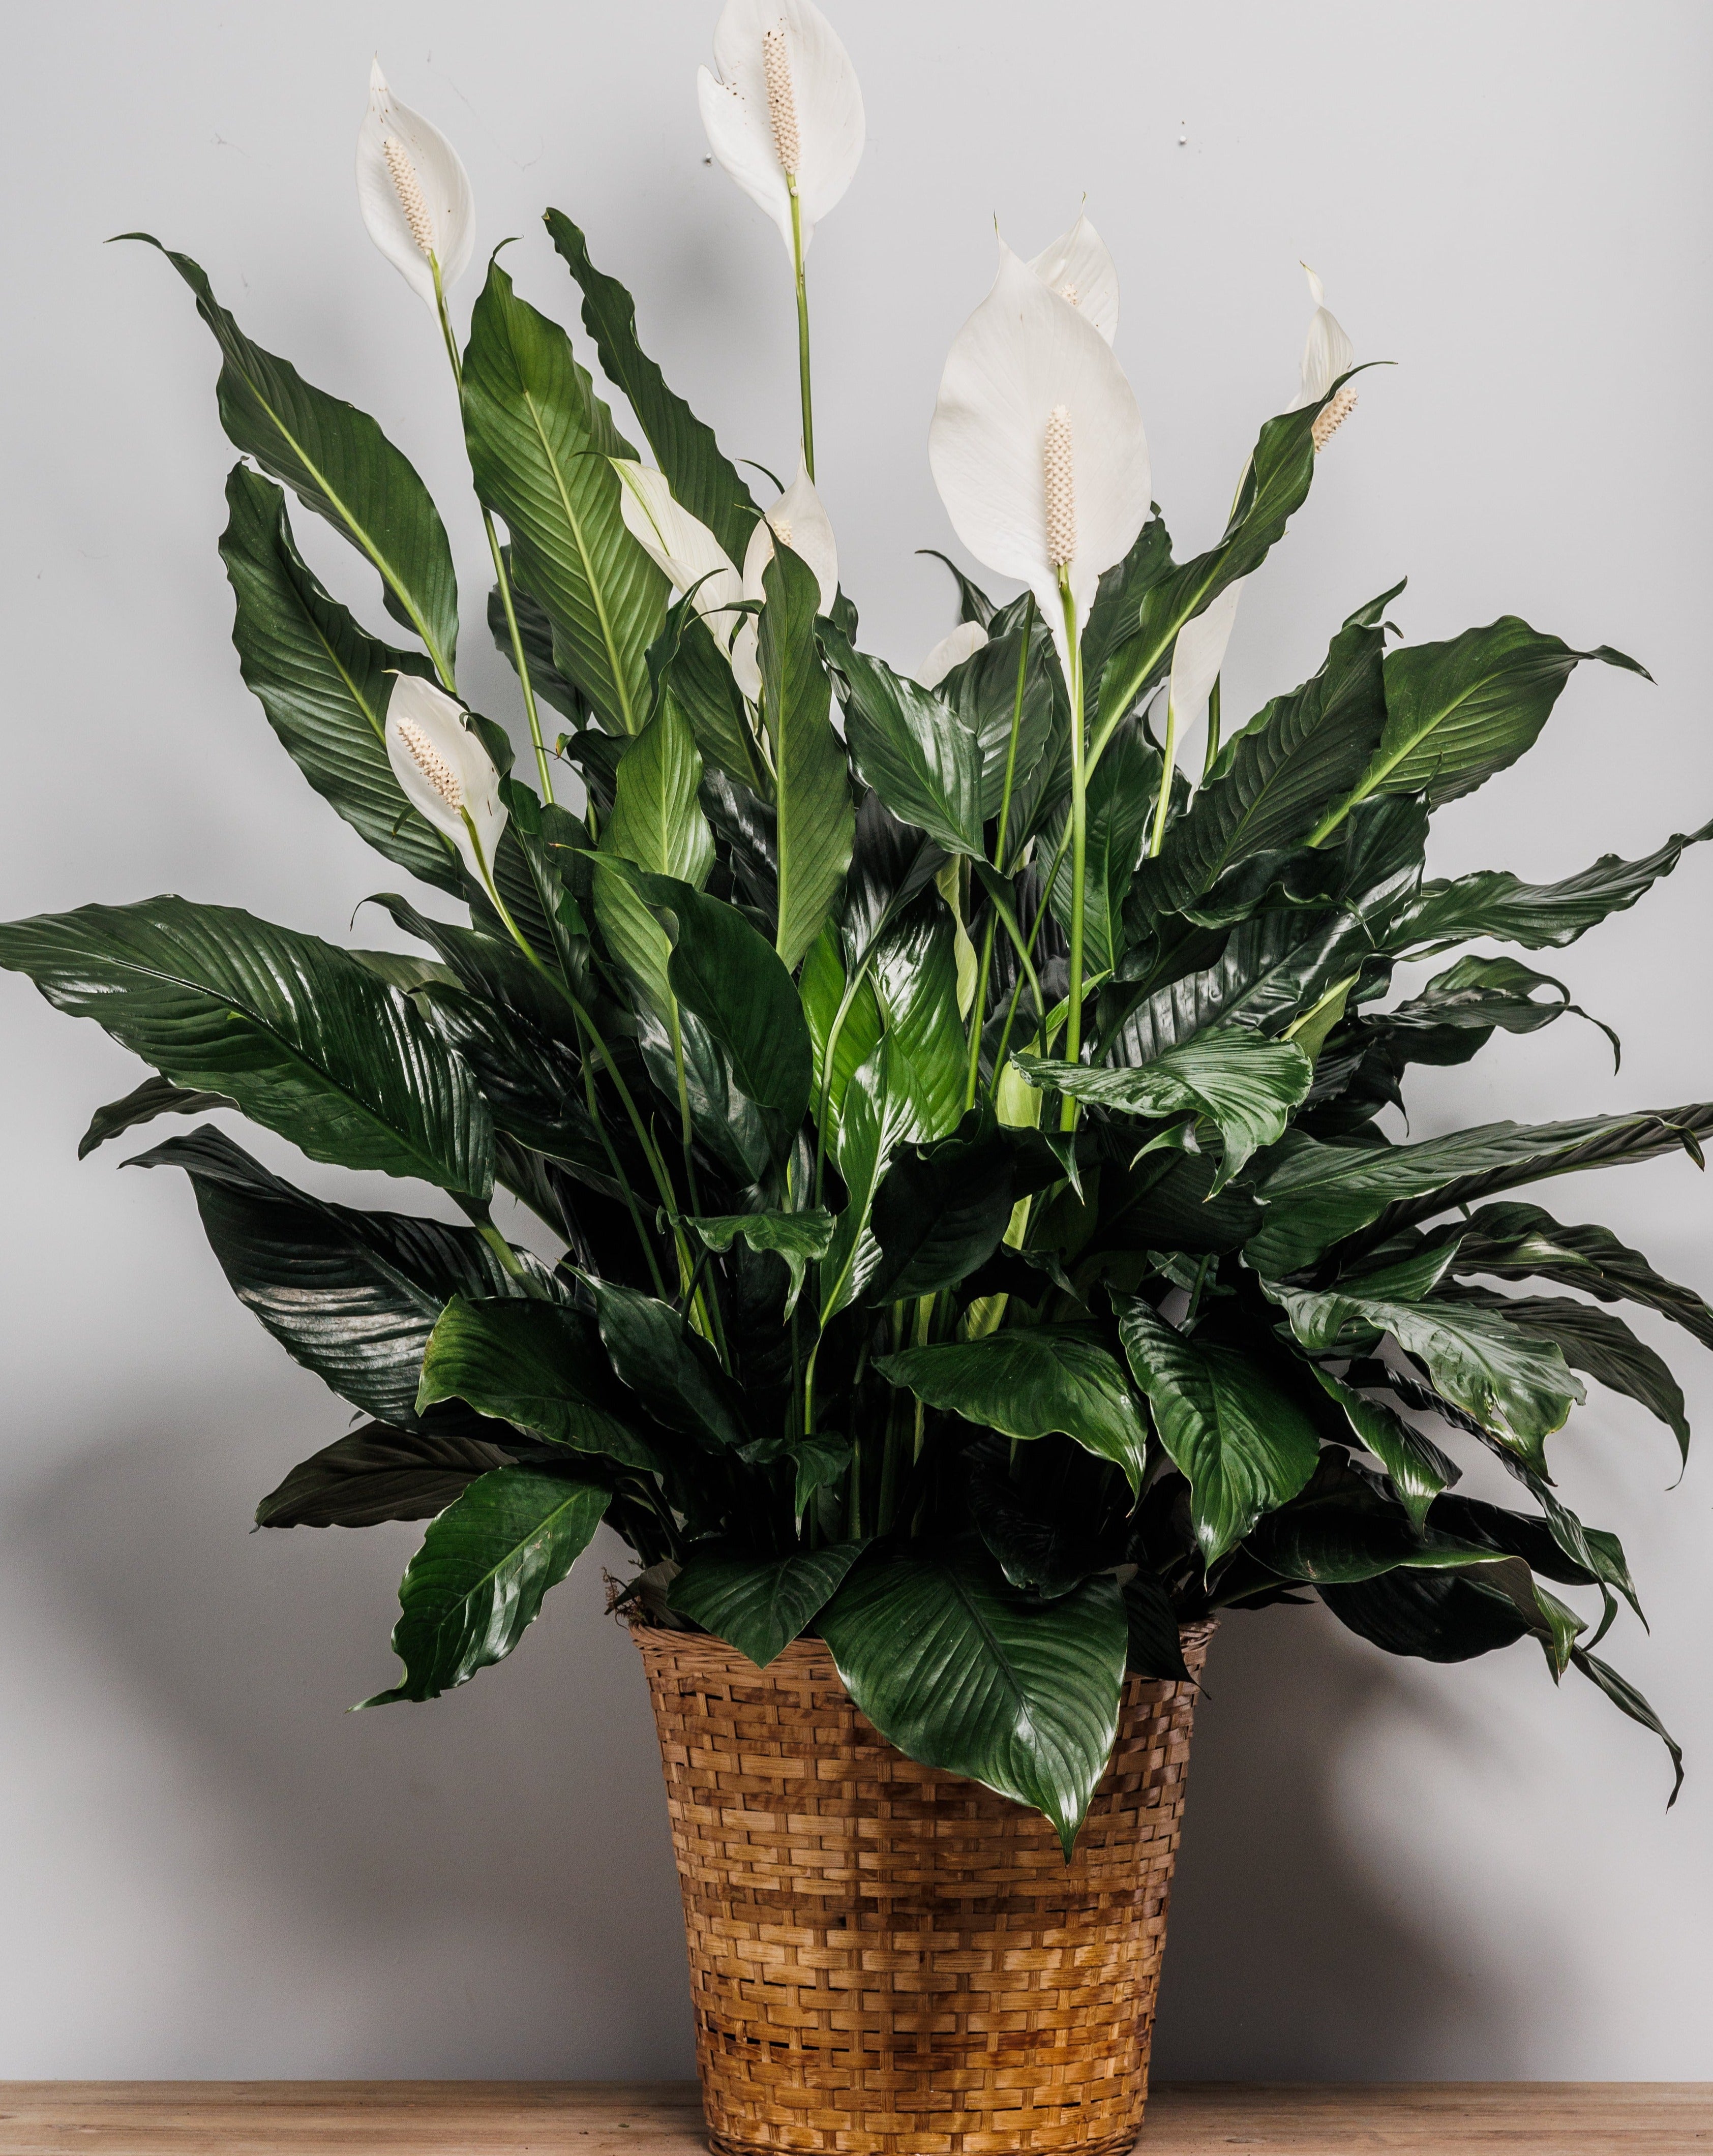 A peace lily in a basket.